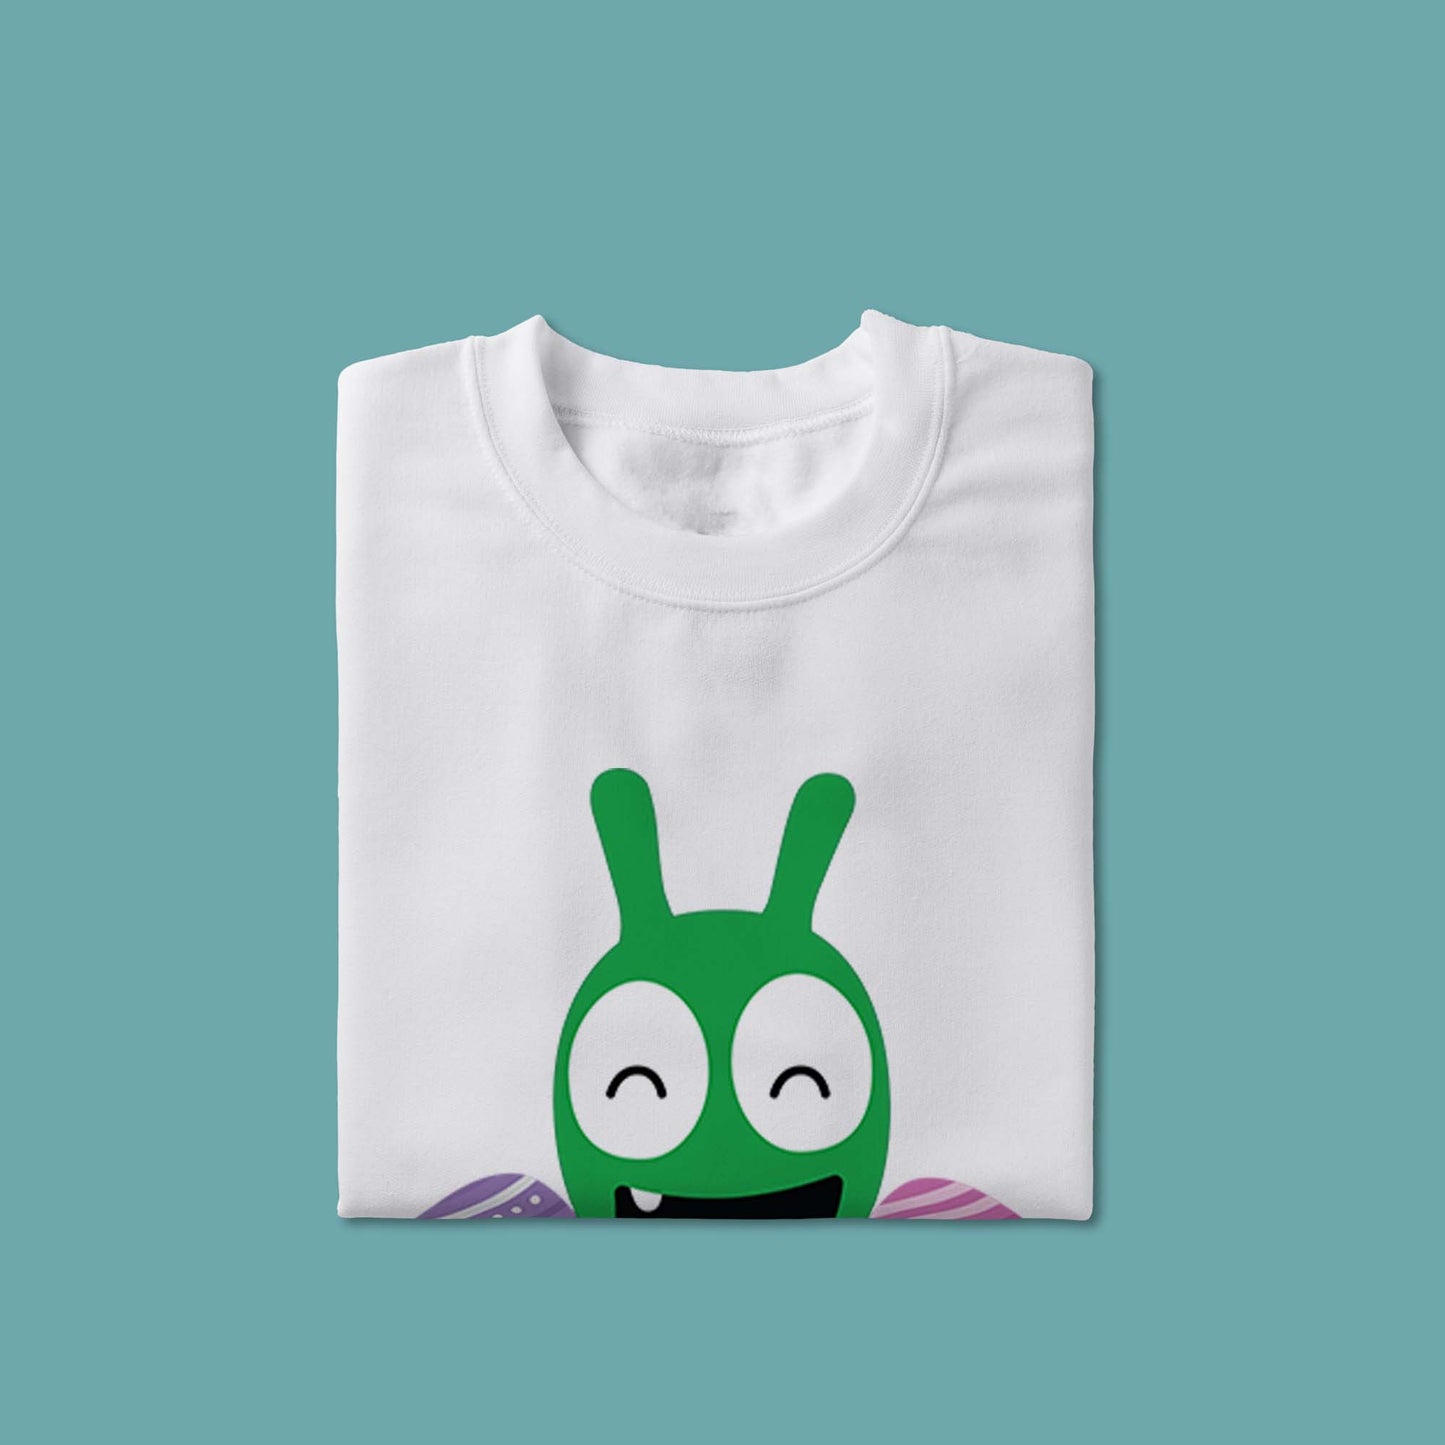 Pea Pea Egg Hunt Mode On Youth T Shirt